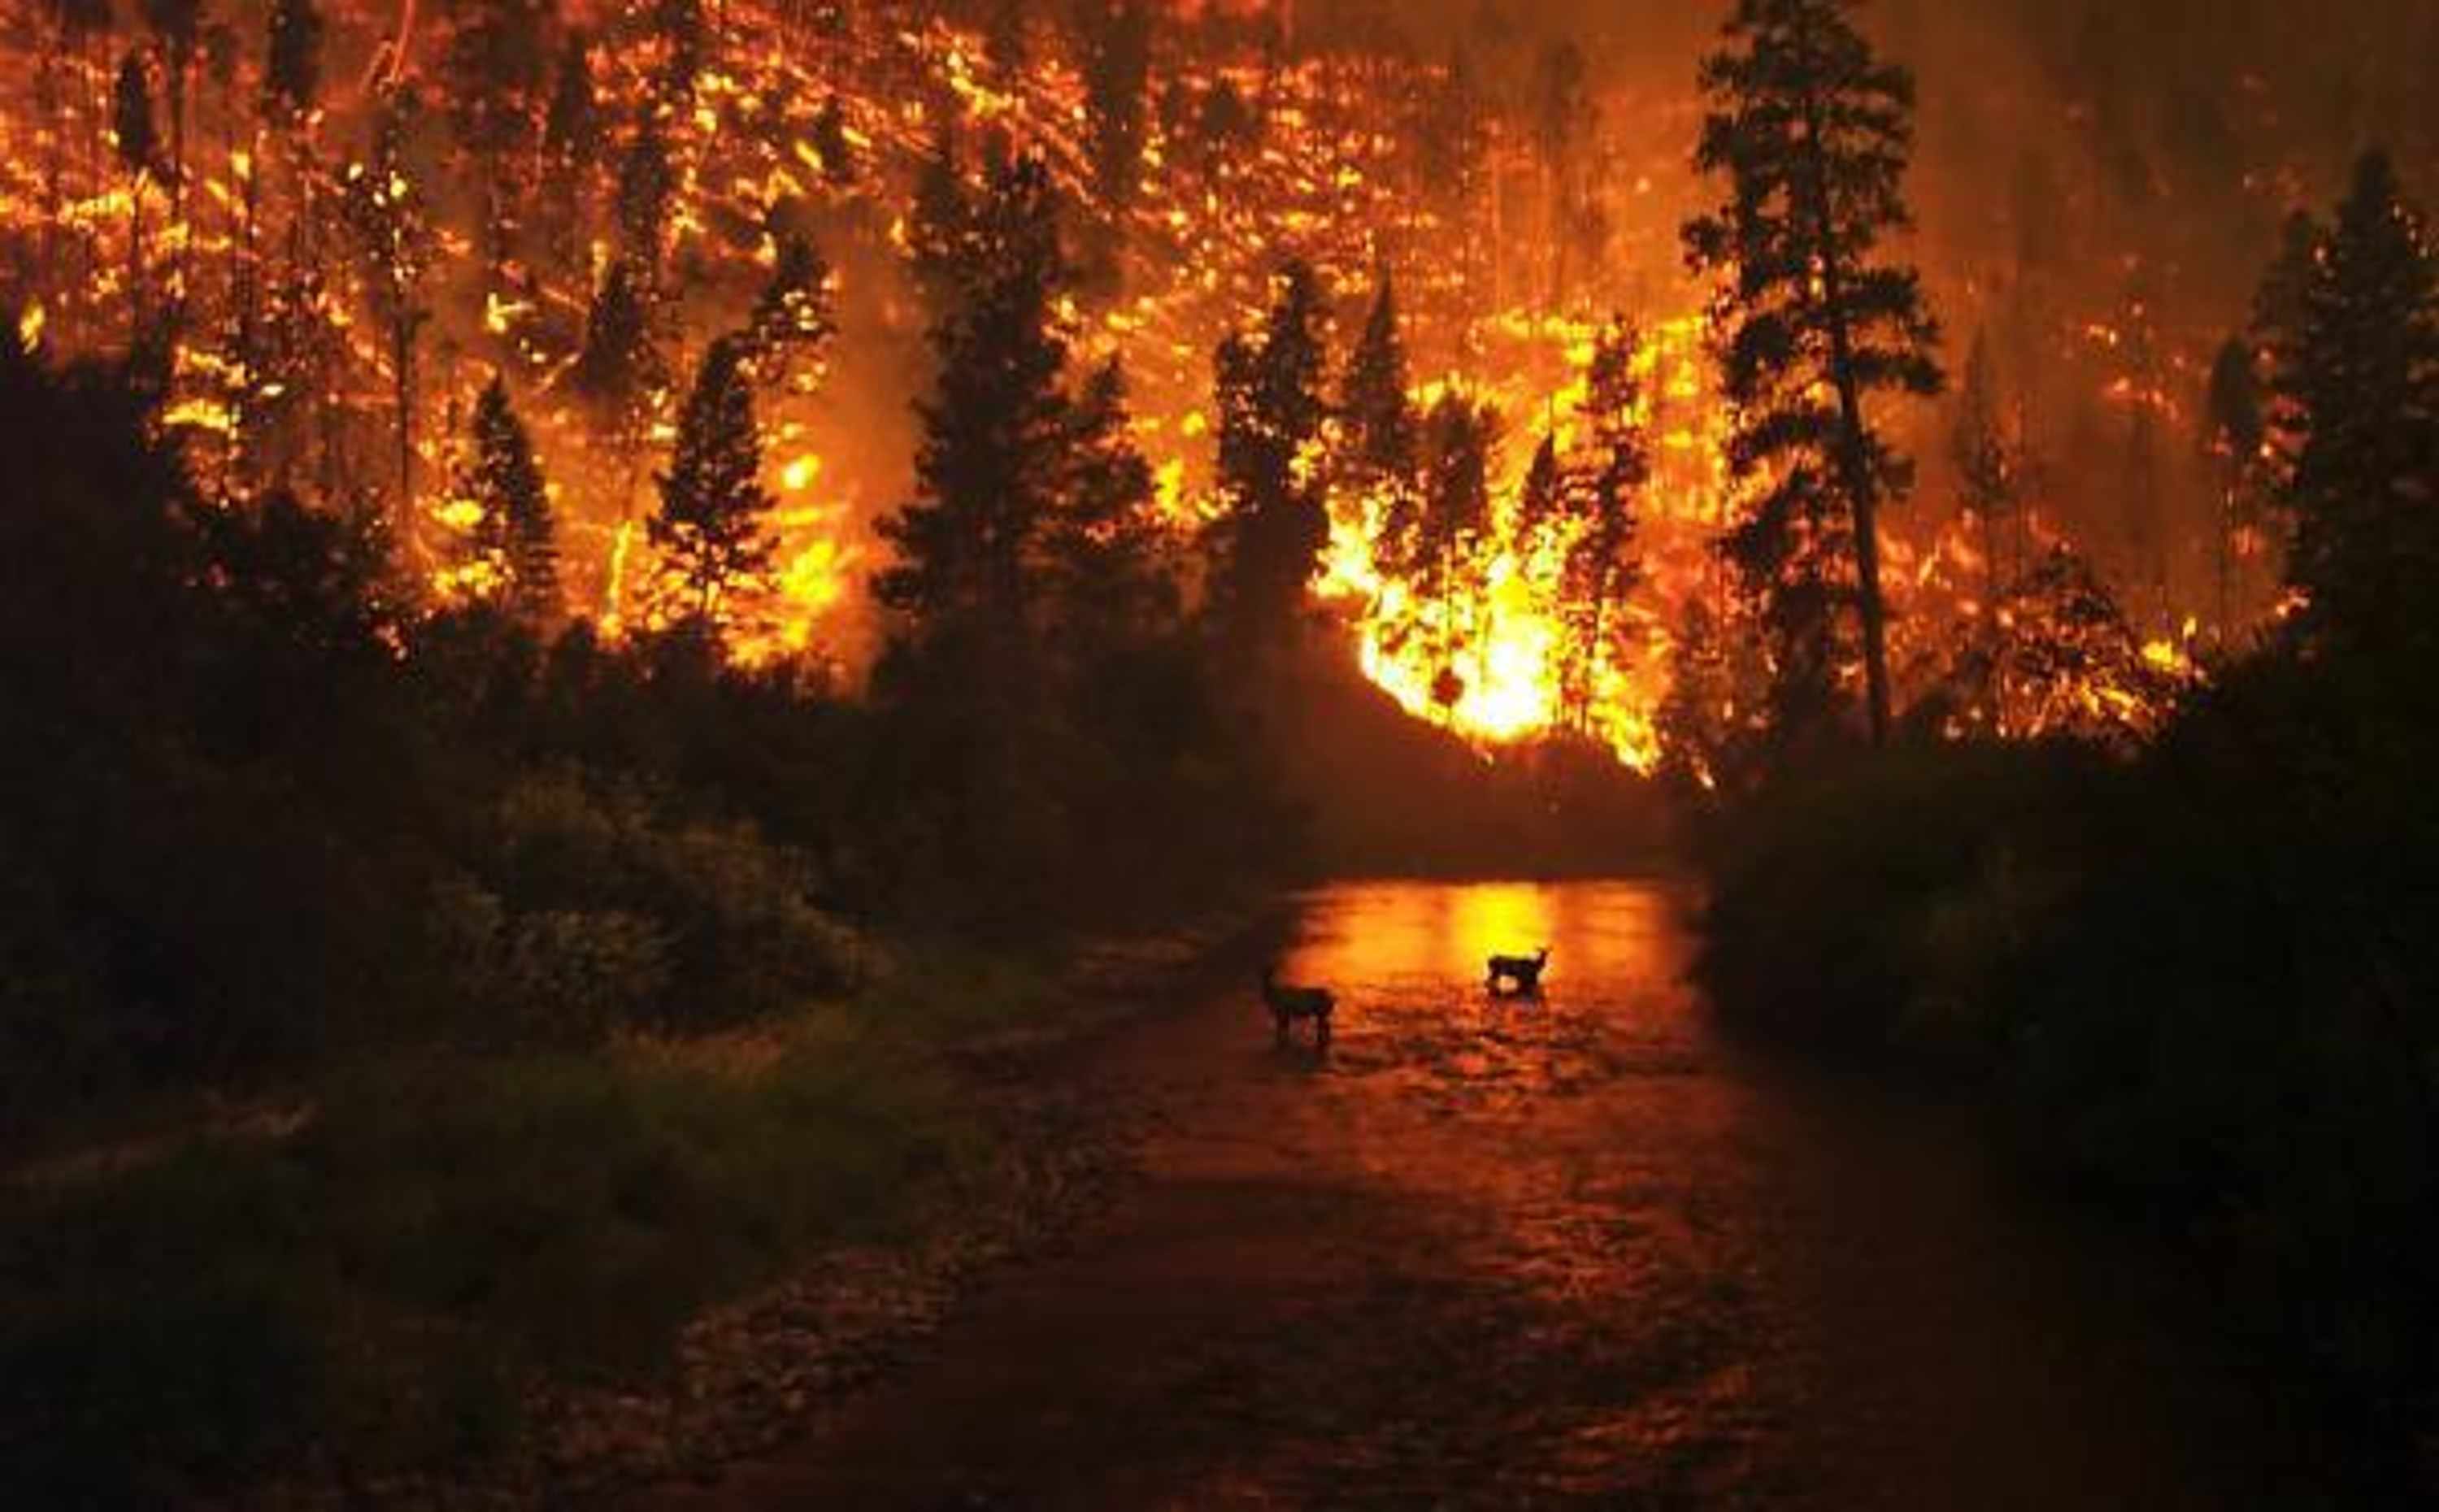 Another-global-warming-effect---forest-fires-pictured-here-two-elks-caught-wildfire-Bitterroot-Natio